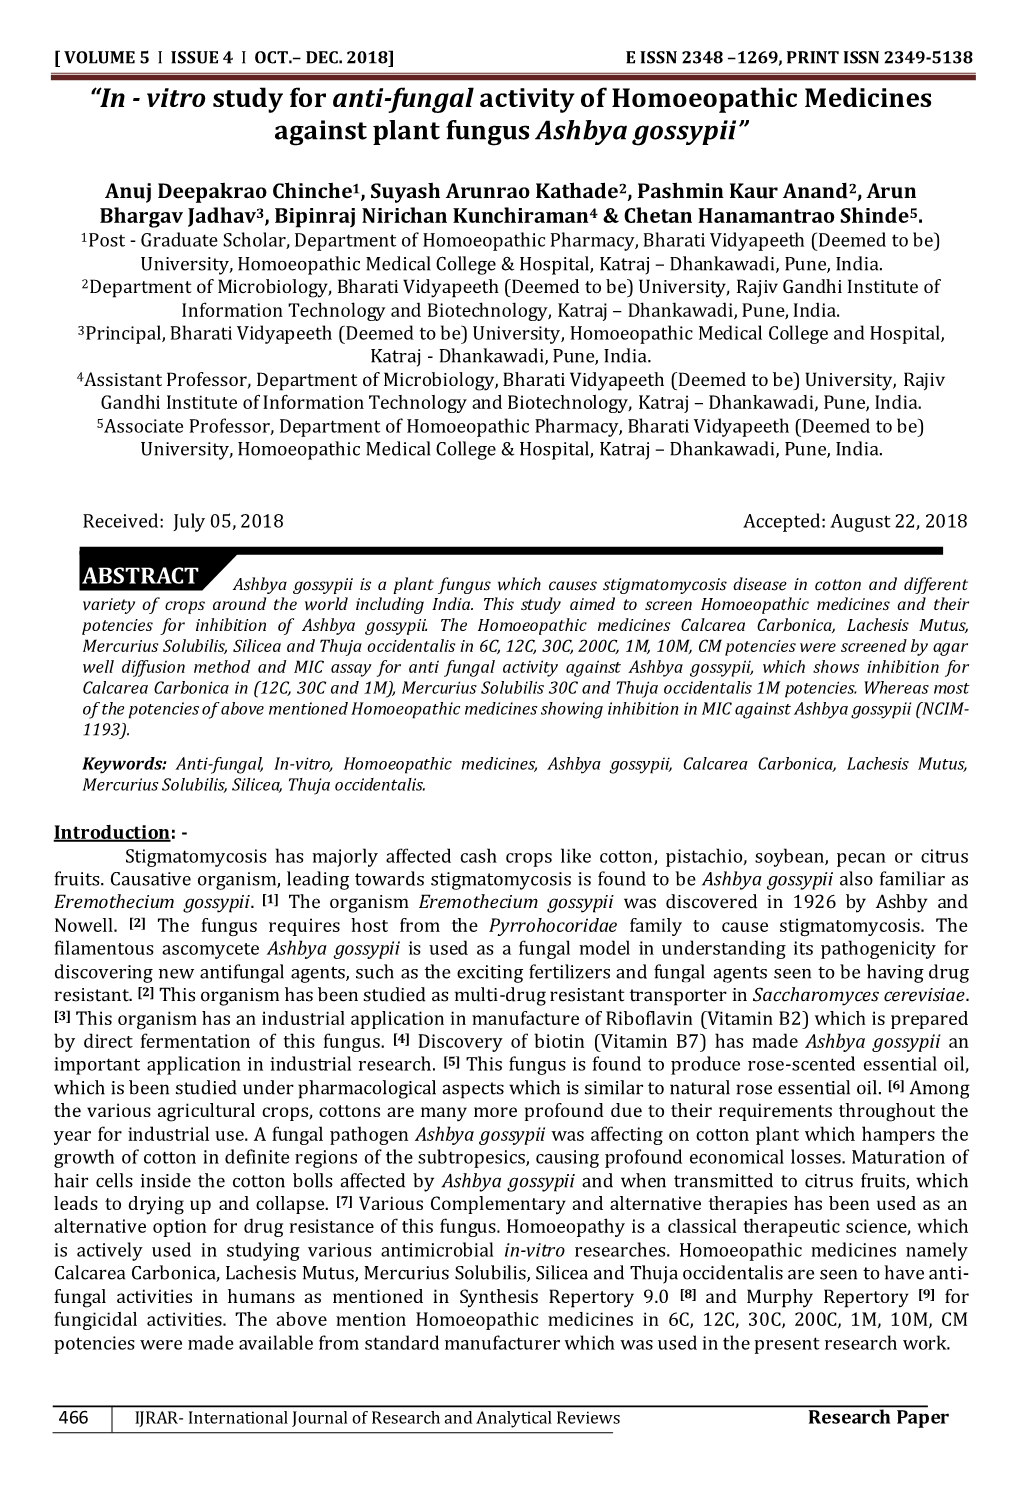 INT ISSN 2349-5138 “In - Vitro Study for Anti-Fungal Activity of Homoeopathic Medicines Against Plant Fungus Ashbya Gossypii”